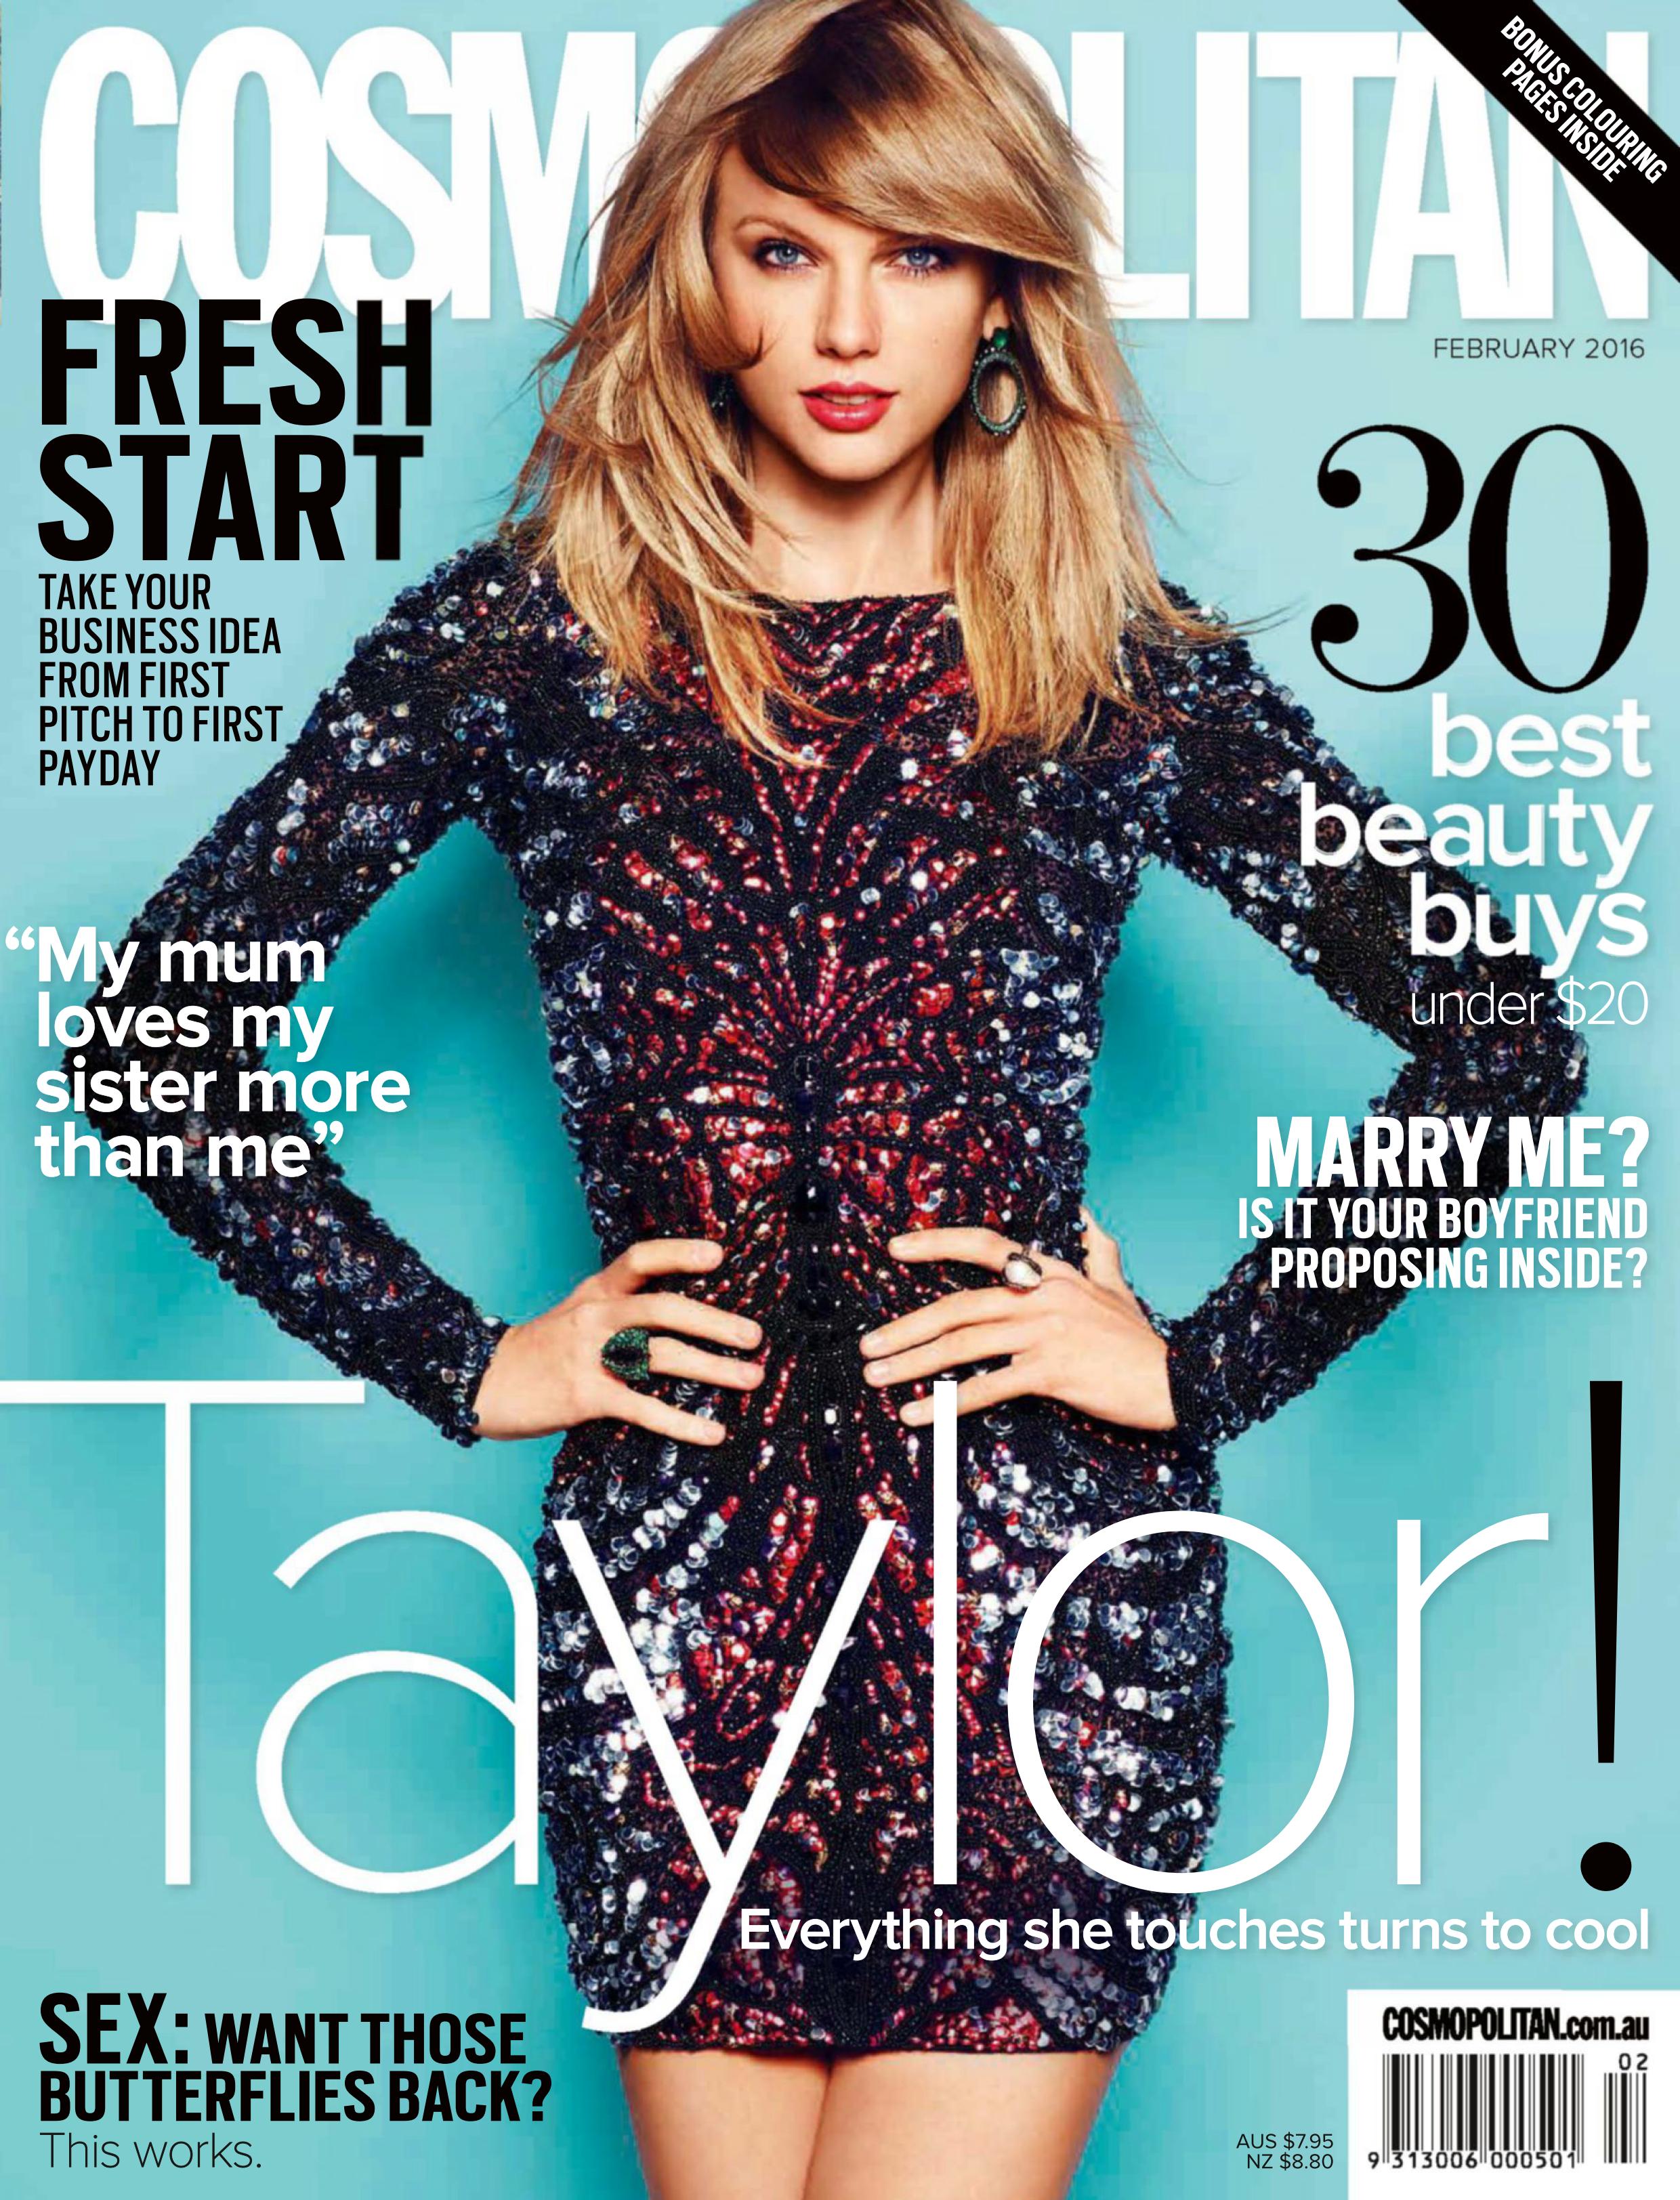 Taylor Featured On The Cover Of The February Edition Of Cosmo Australia